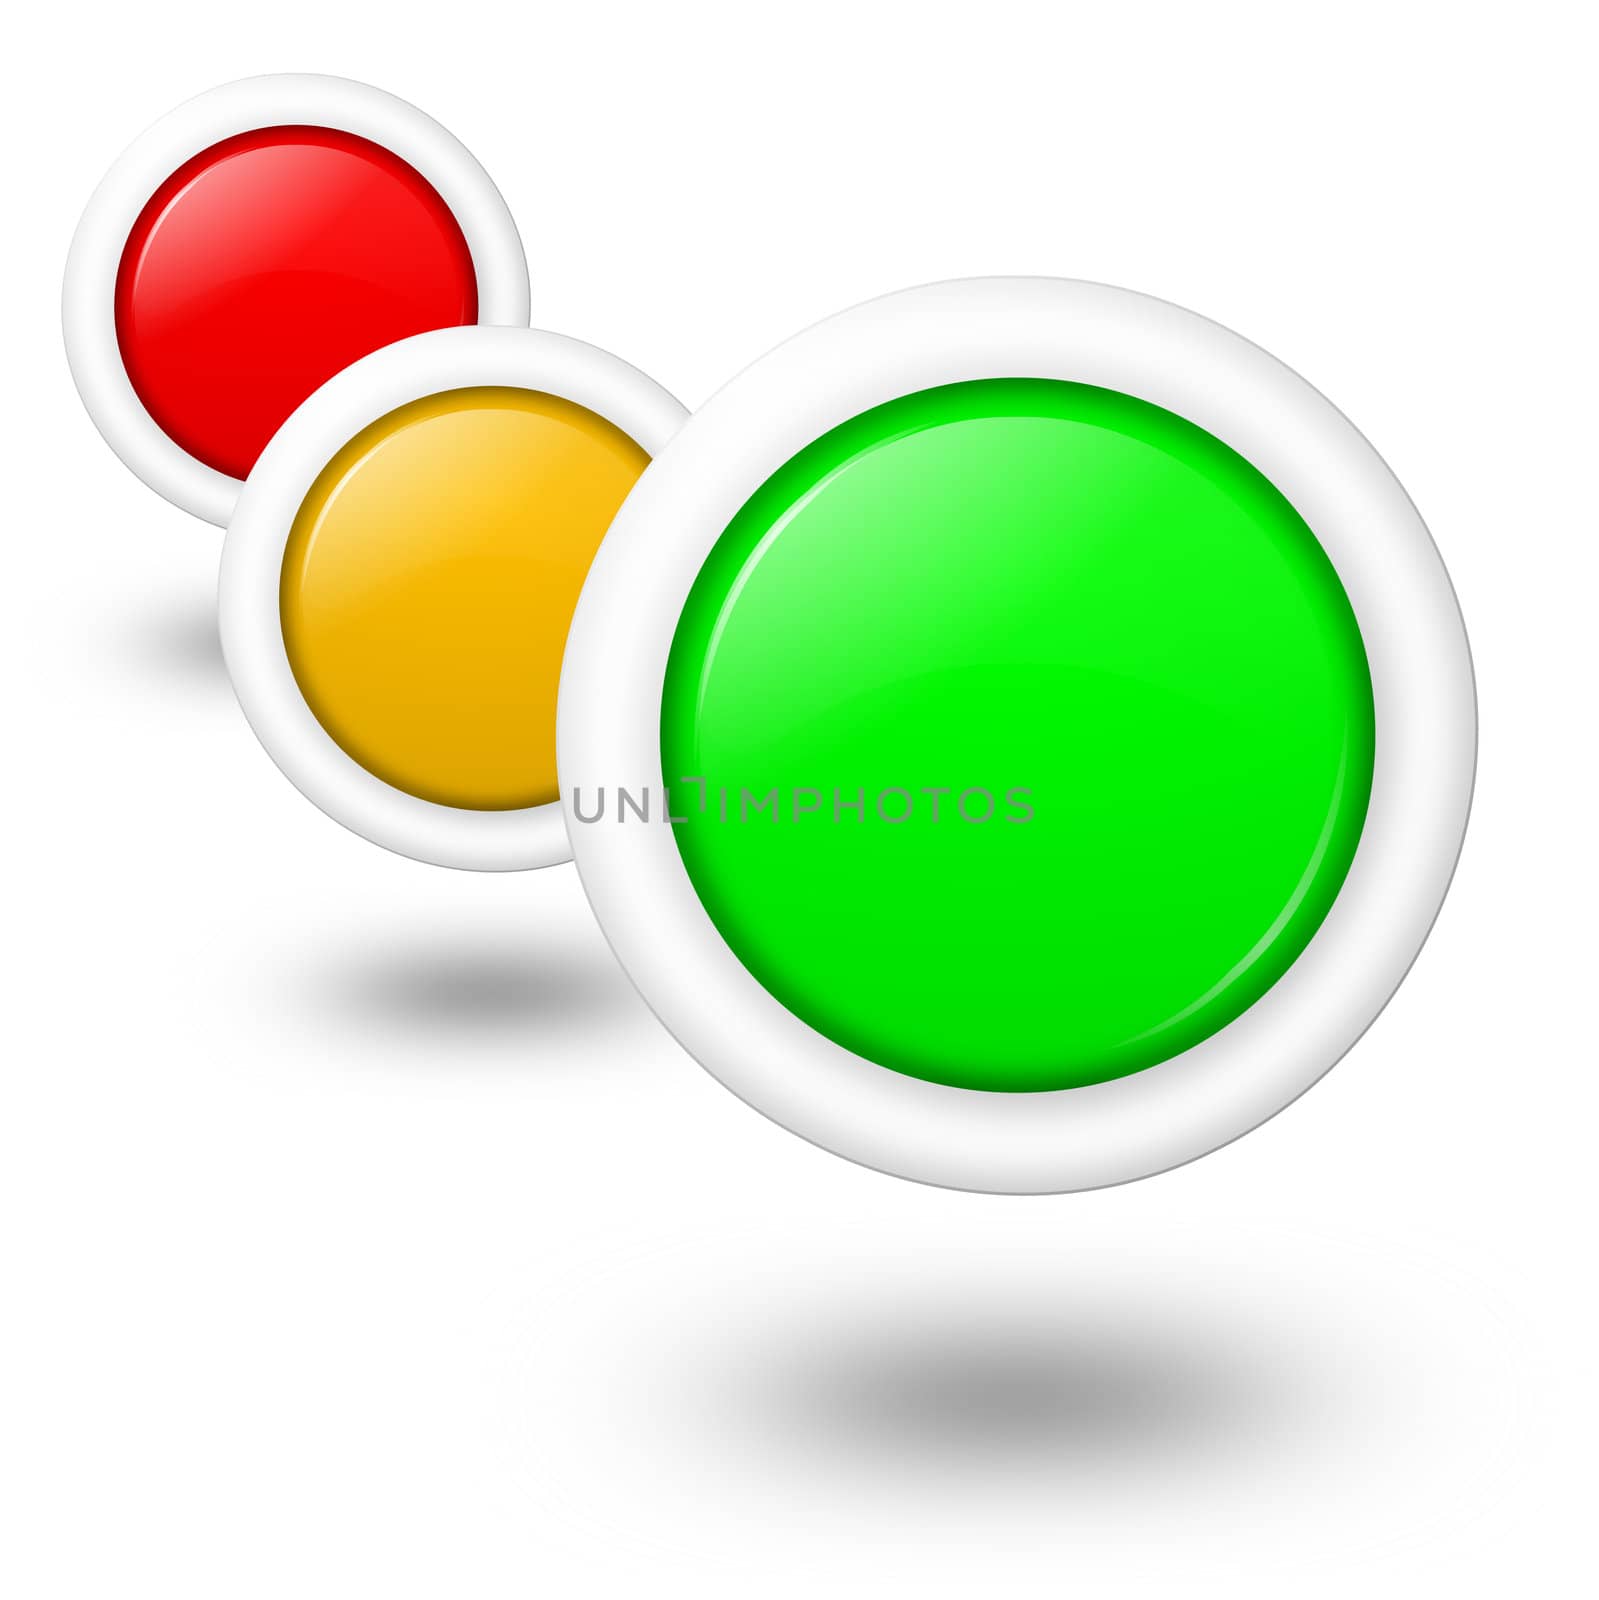 Consumpion, energy and environment multipurpose concept empty buttons with white border and shadow